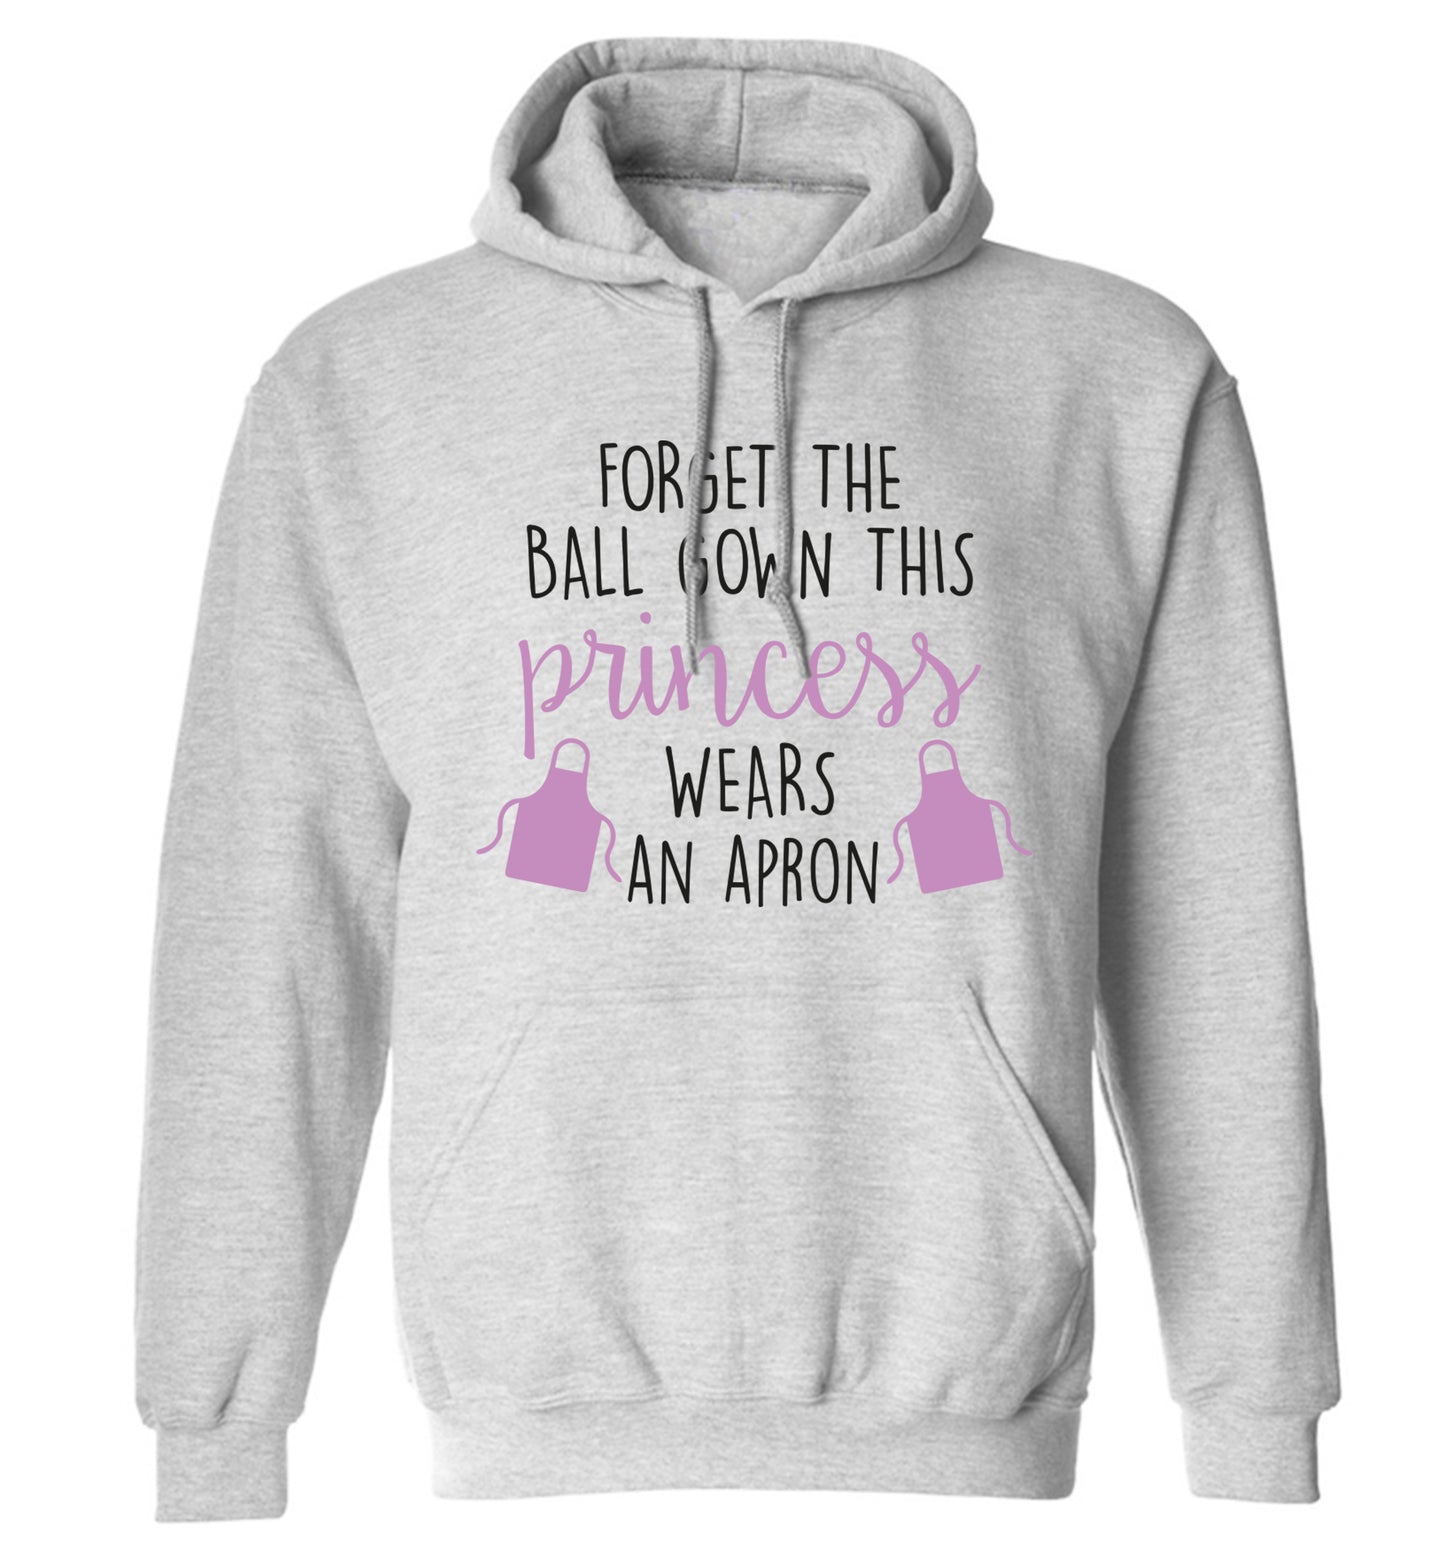 Forget the ball gown this princess wears an apron adults unisex grey hoodie 2XL